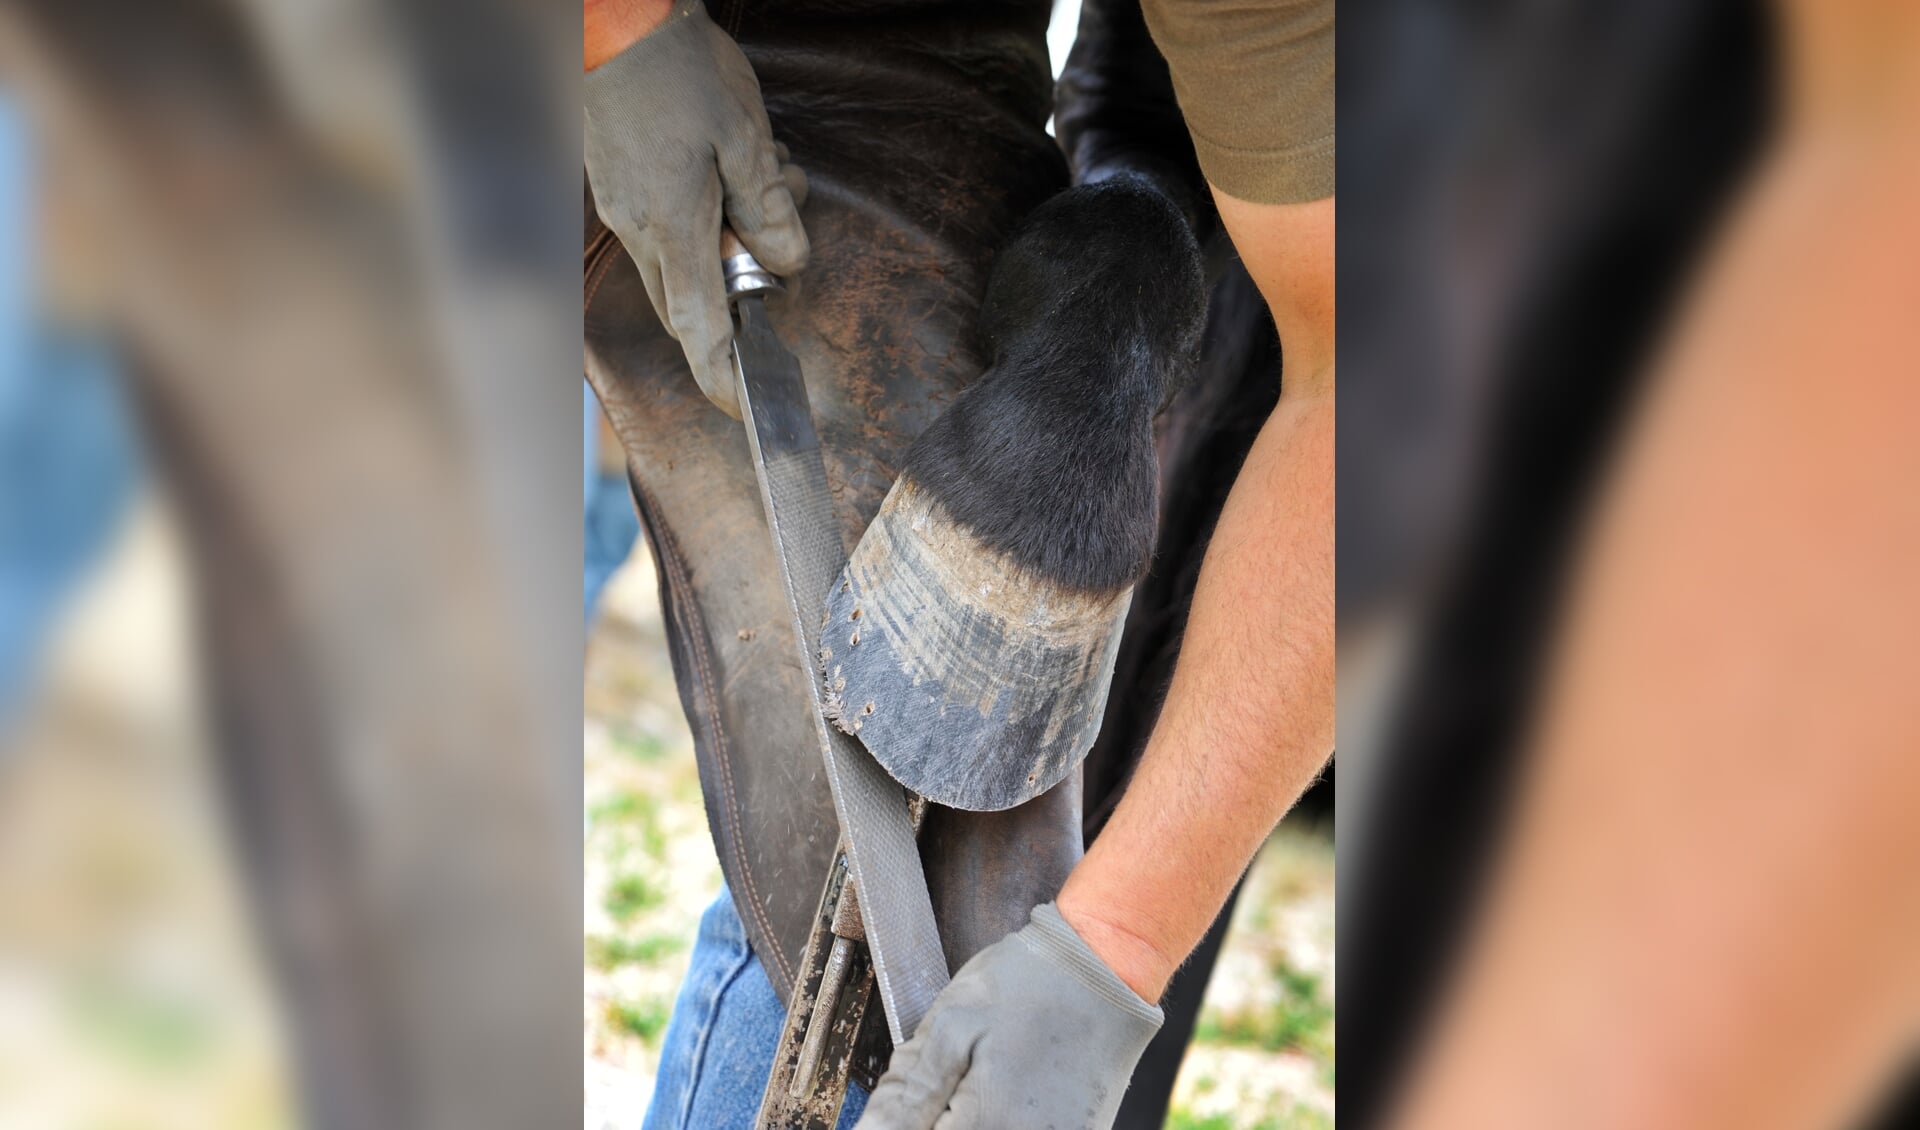 a Farrier rasping an horses hoof, close up on the hoof